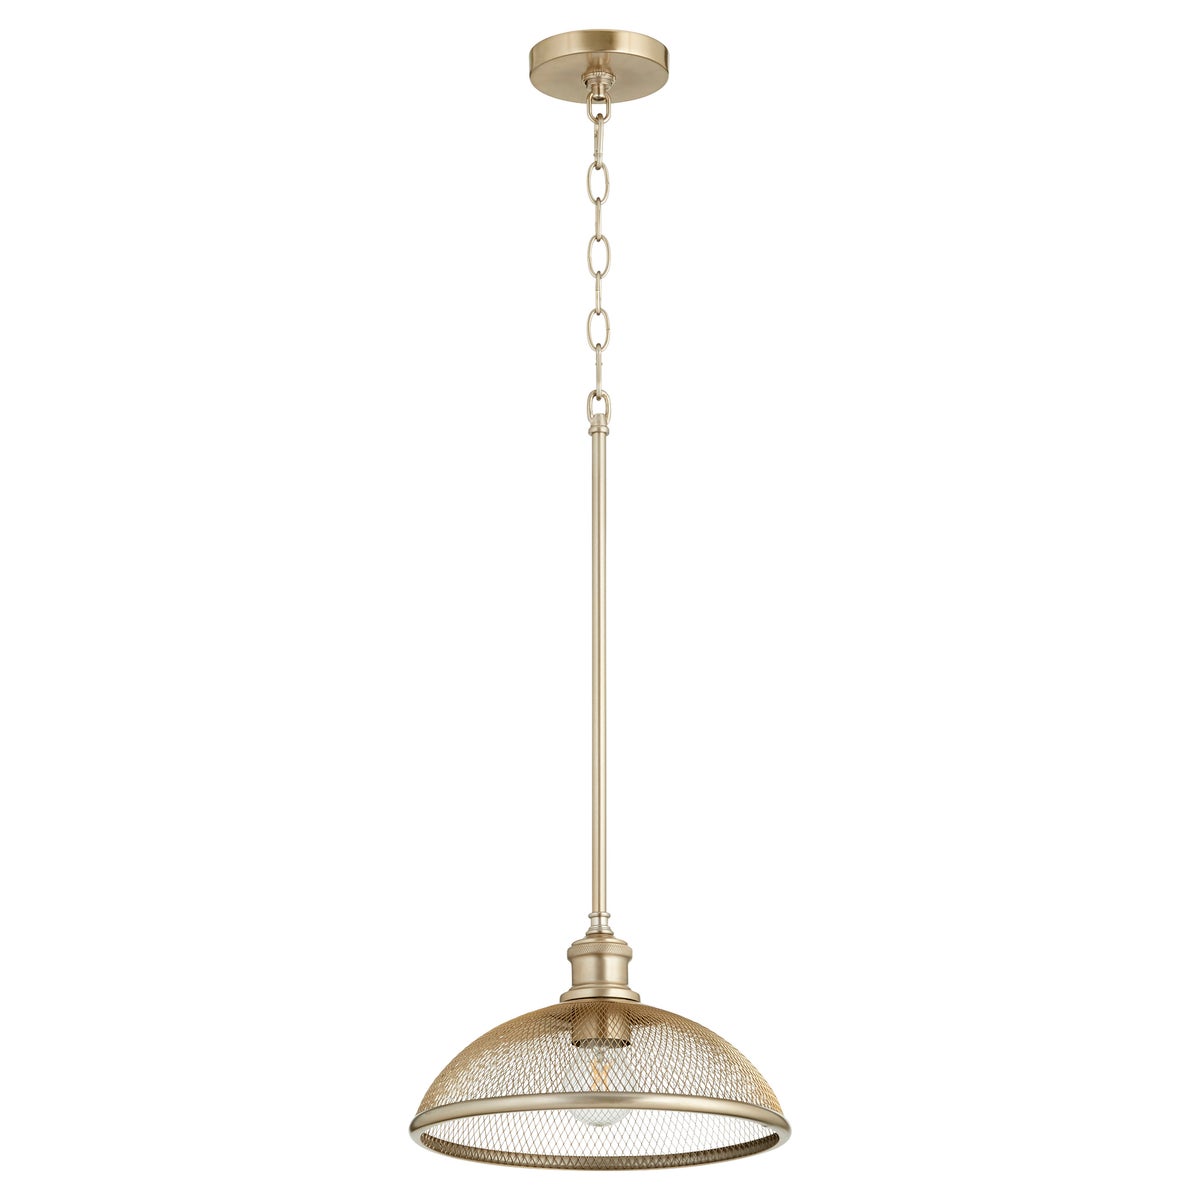 Industrial Pendant Light with mesh silhouette and crisscross patterns, showcasing subtle bulbs. Versatile transitional styling for contemporary and traditional settings. Quorum International, 100W, 1-bulb fixture. 12&quot;W x 7.25&quot;H. UL Listed, Damp Location. 2-year warranty.